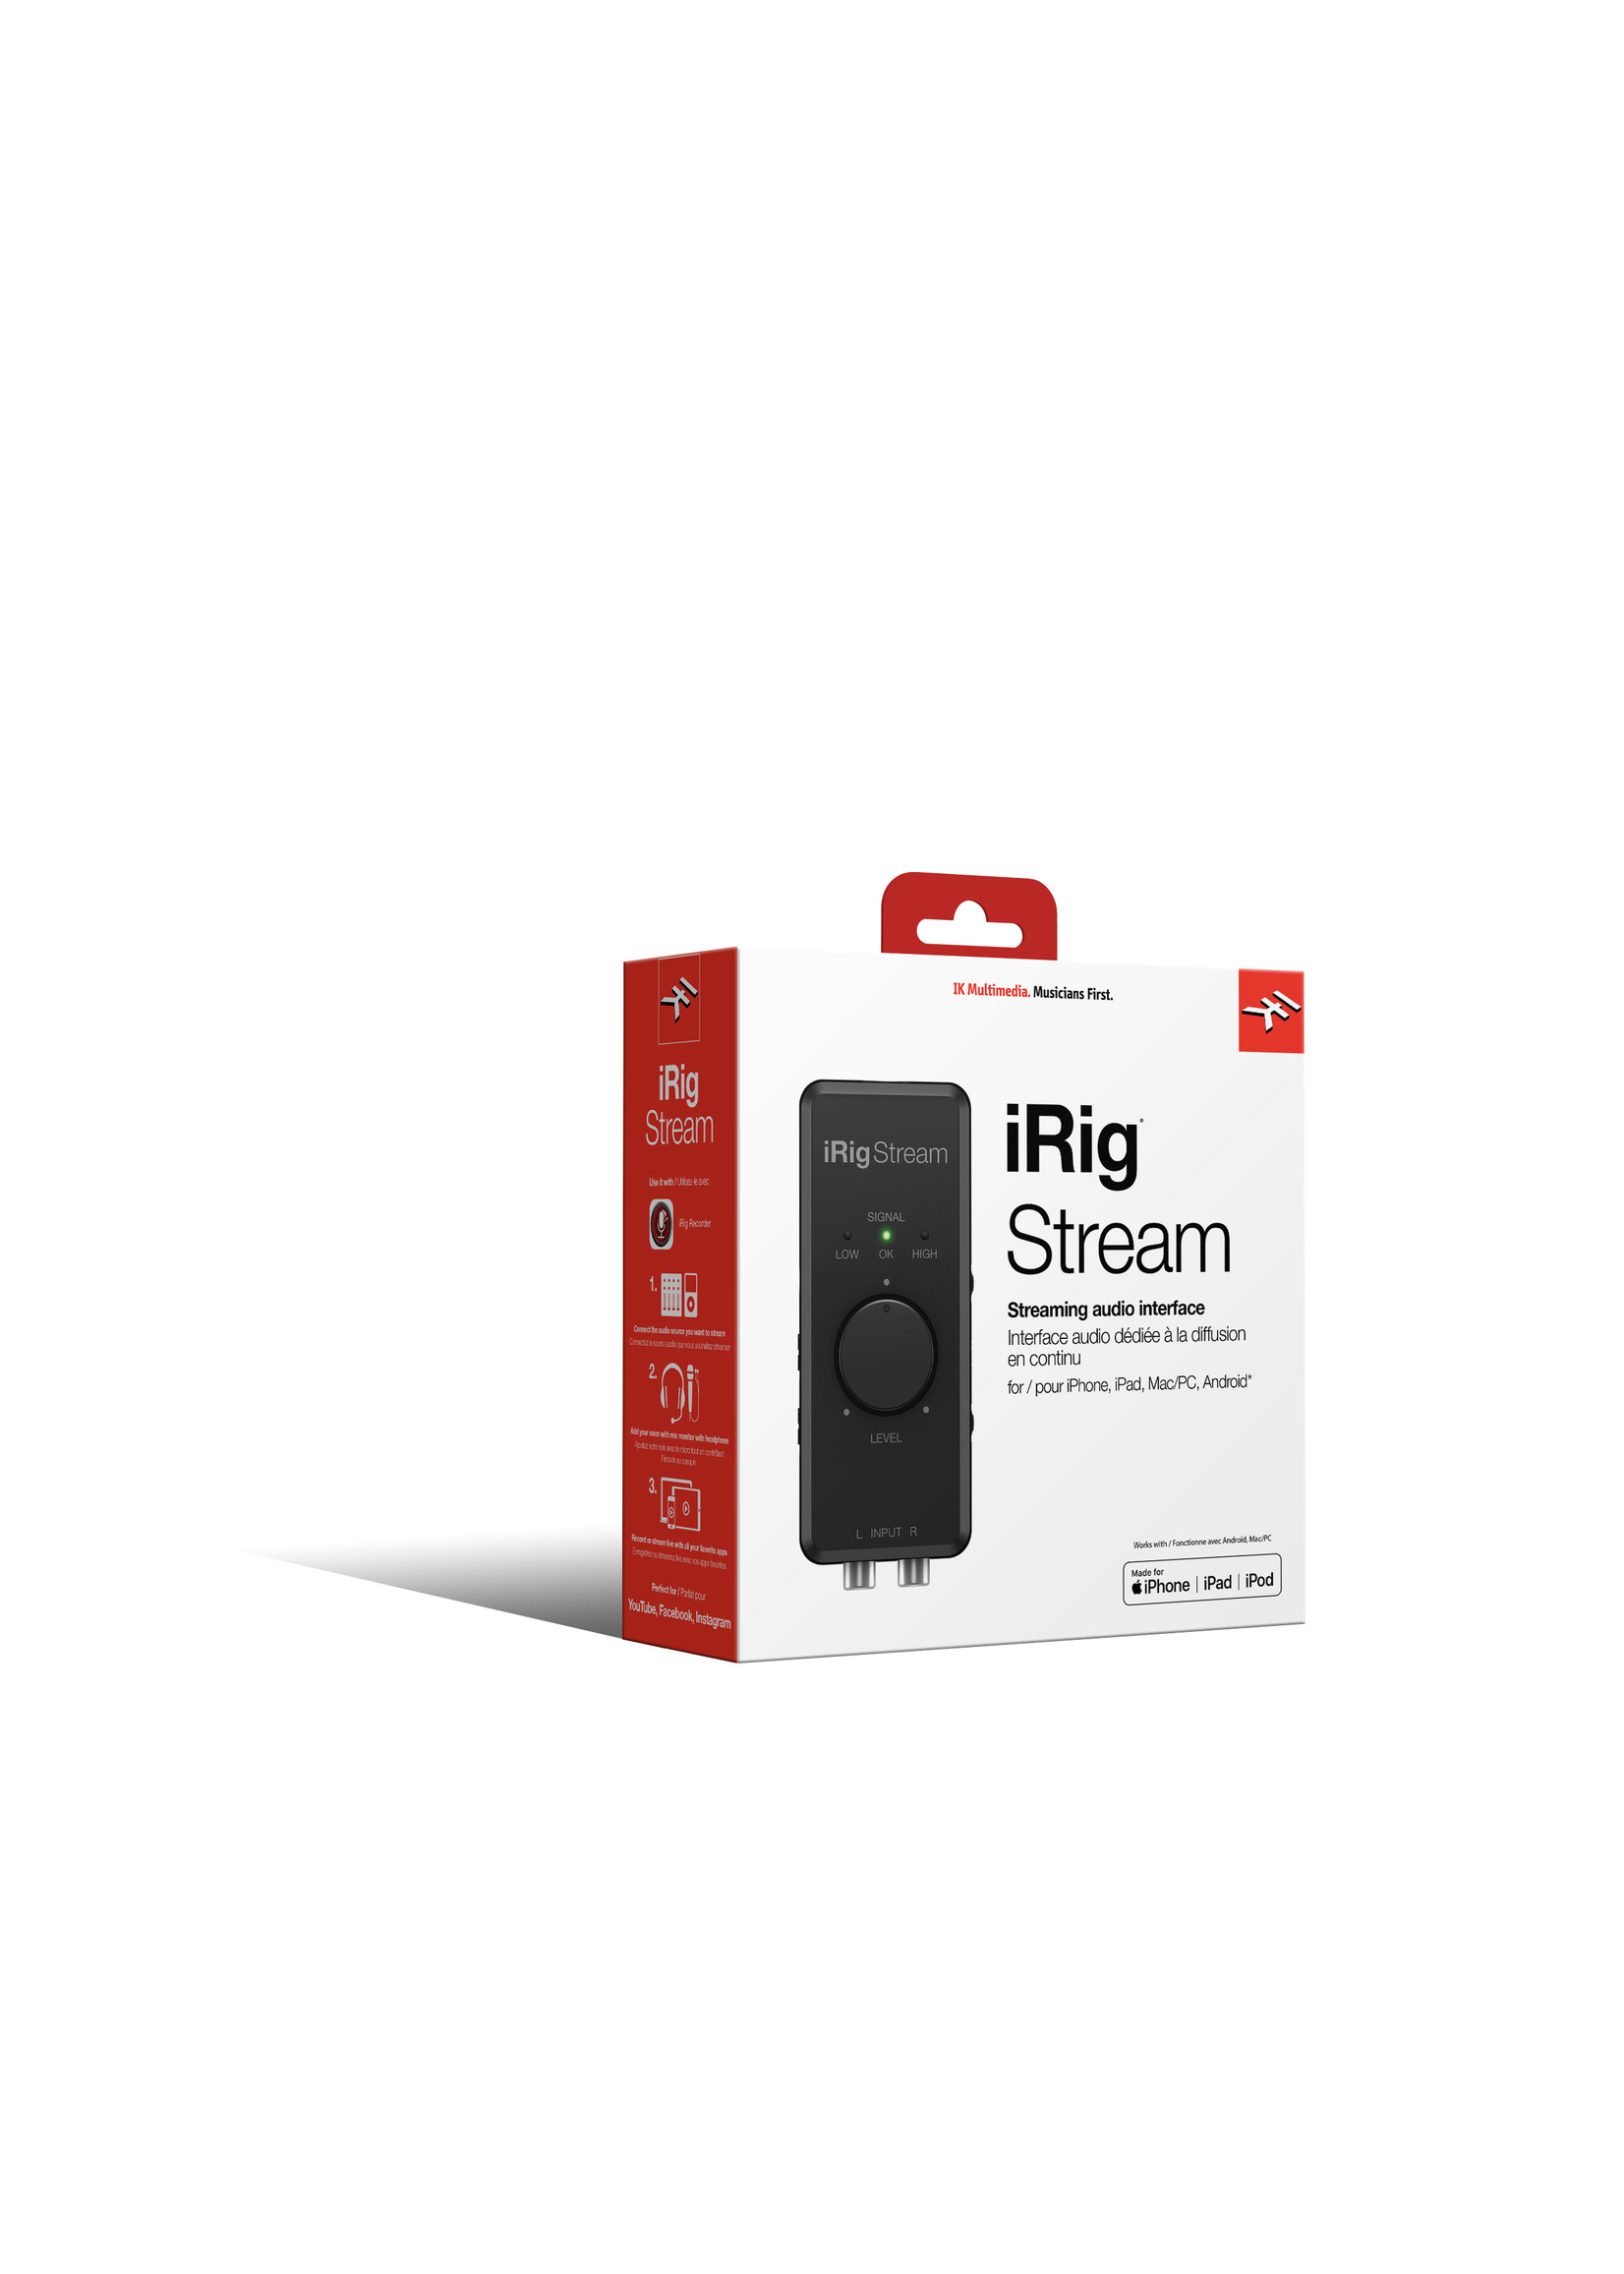 IK Multimedia IK Multimedia iRig Stream 2-channel recording & live-streaming audio interface for iPhone, iPad, Android and Mac/PC